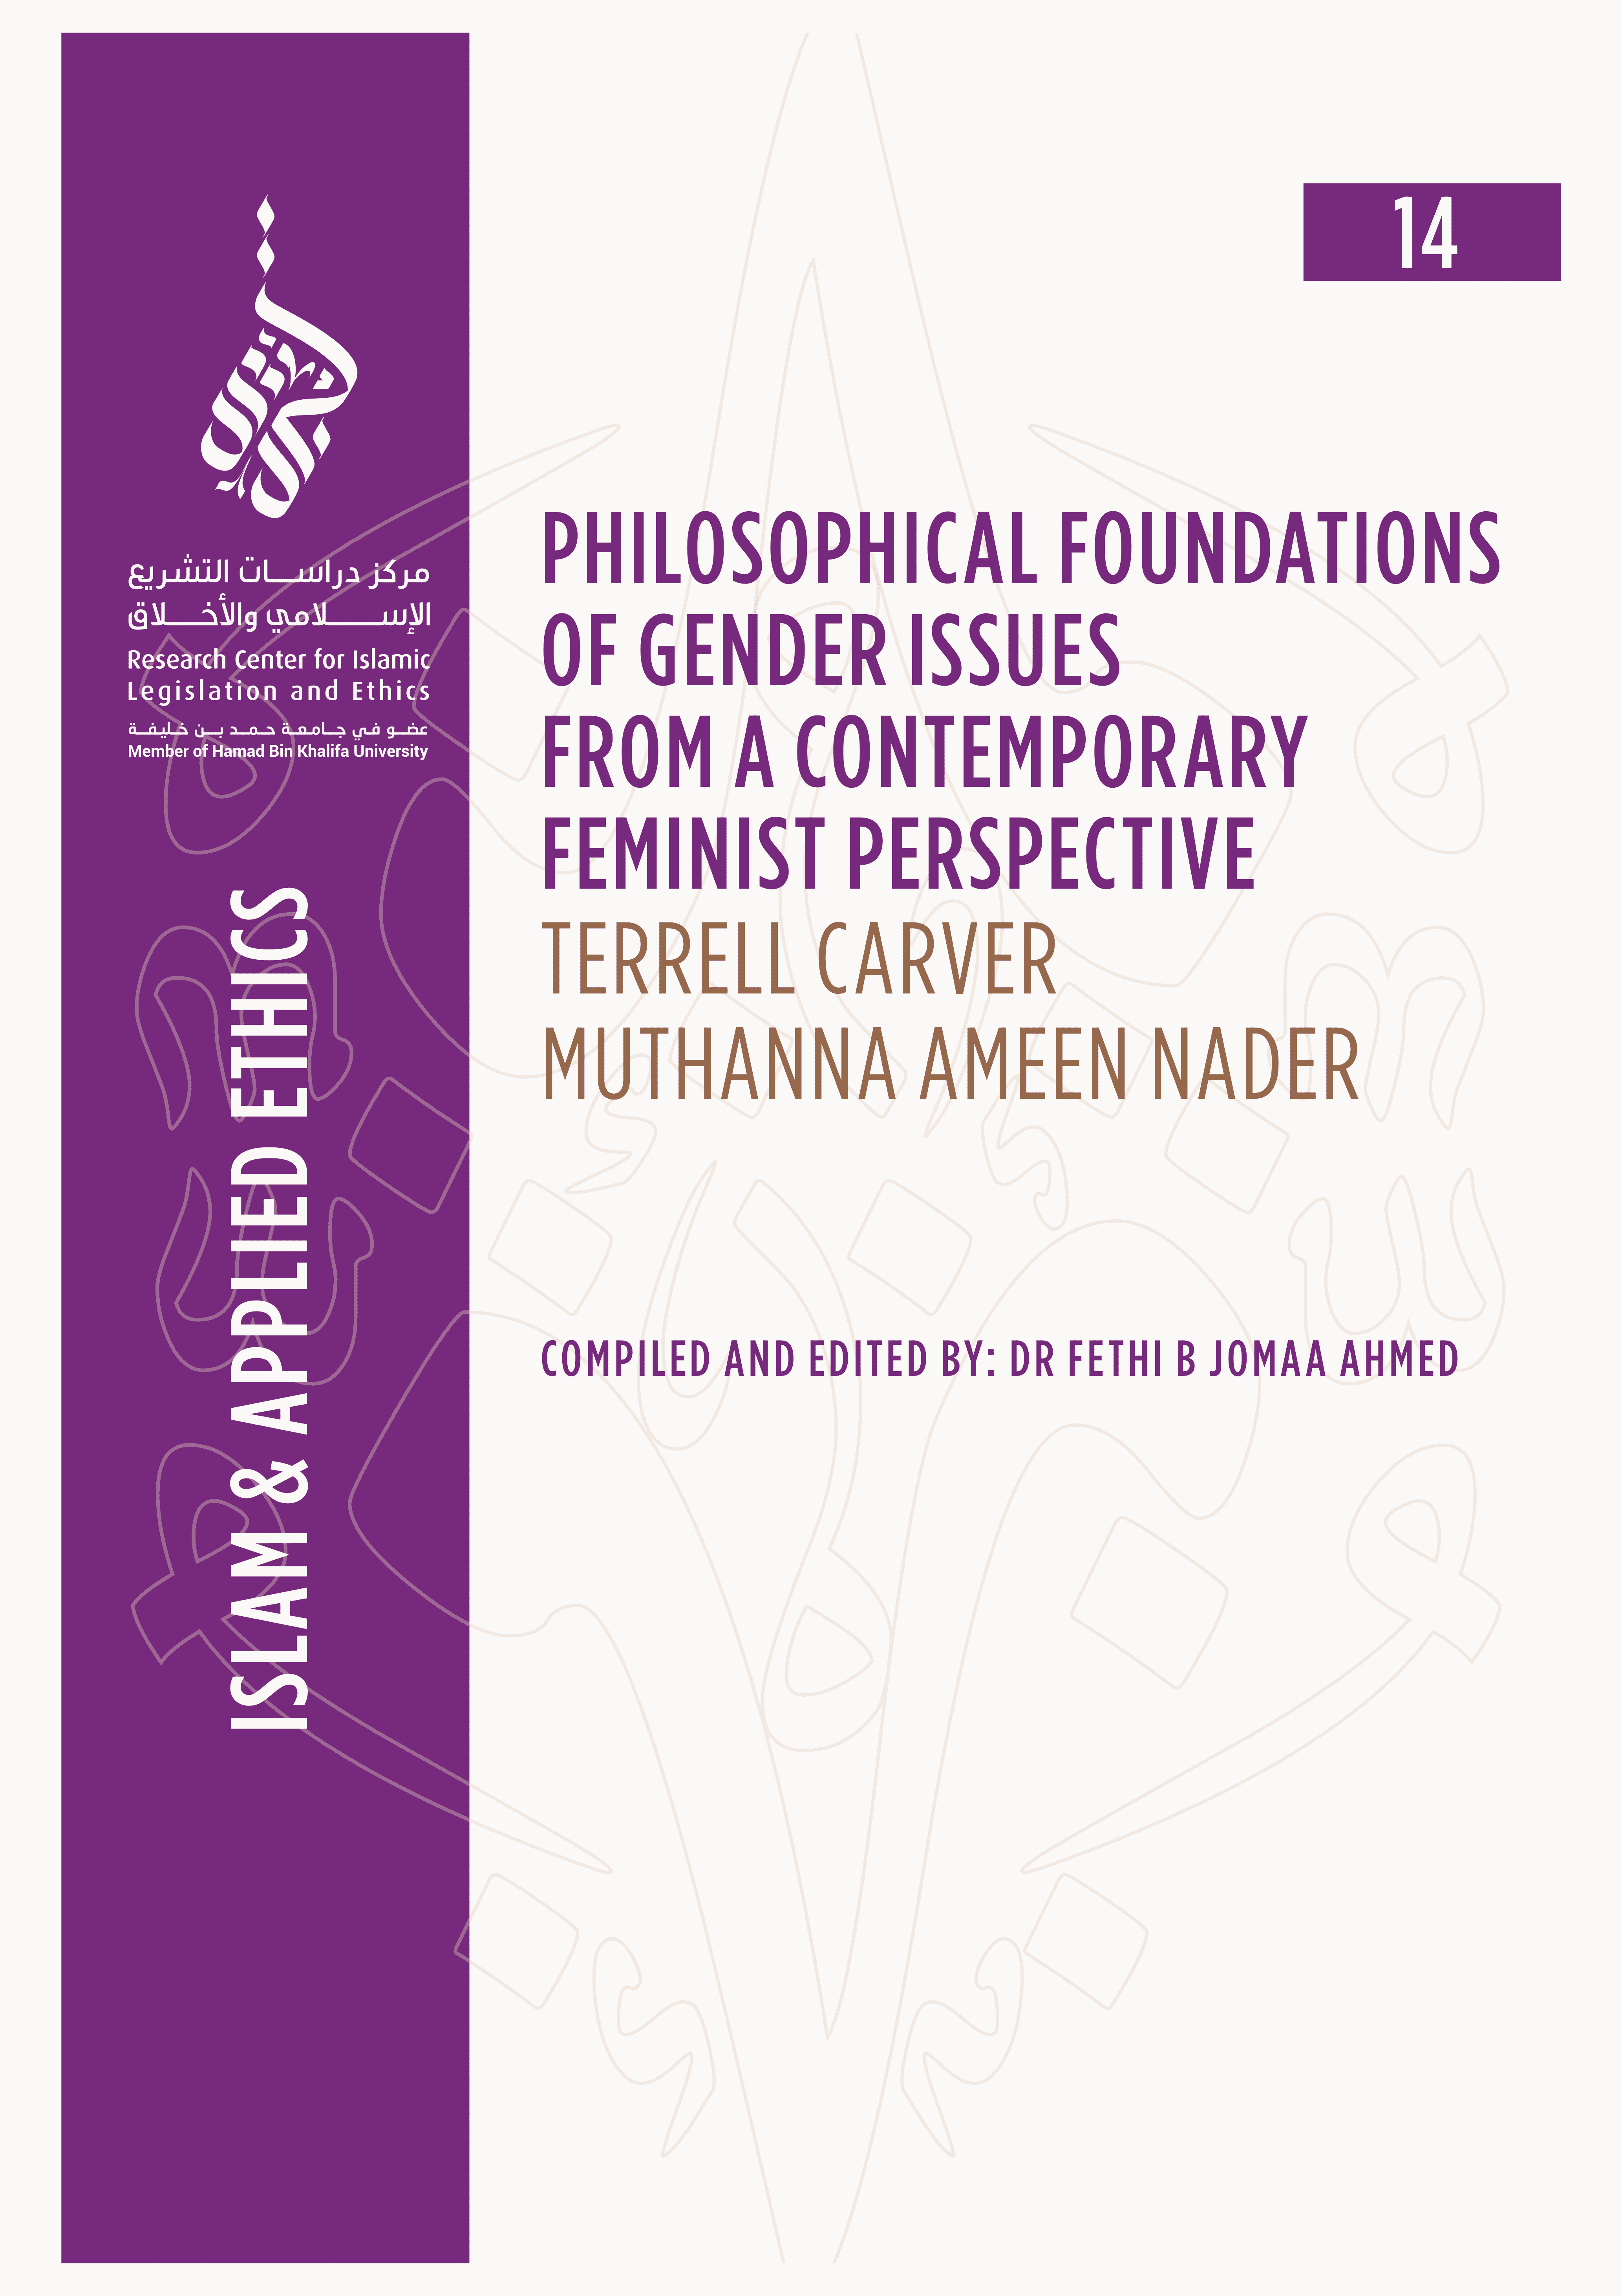 14/14 Philosophical Foundations of Gender Issues from a Contemporary Feminist Perspective